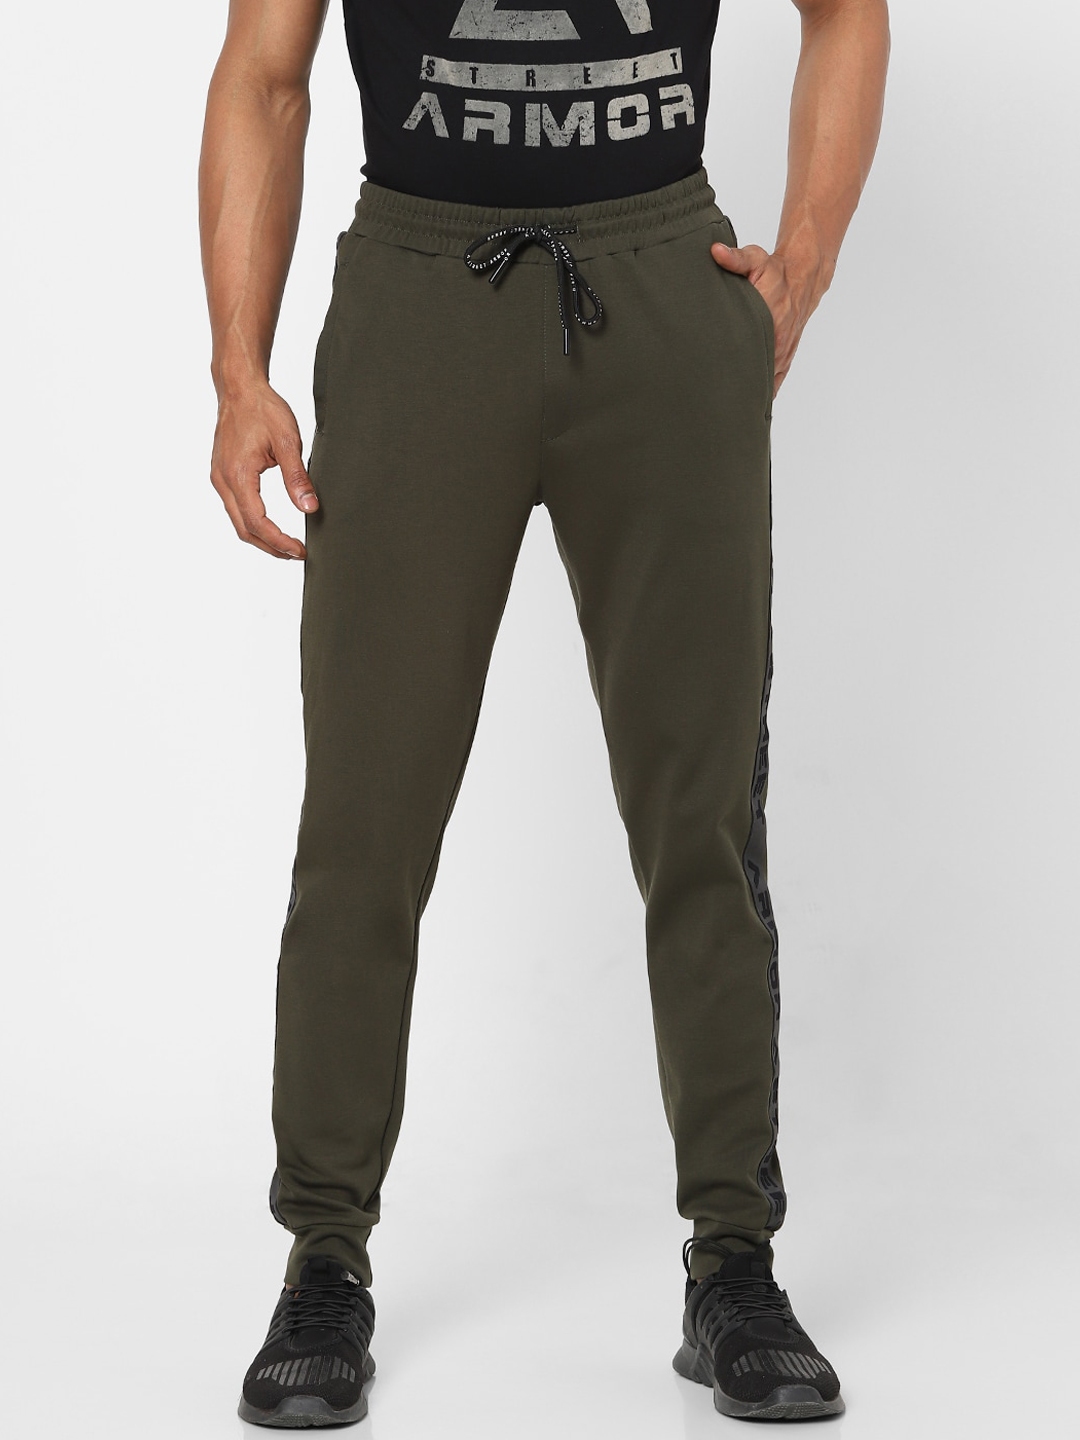 Buy Street Armor By Pantaloons Men Green Joggers Trousers - Trousers ...